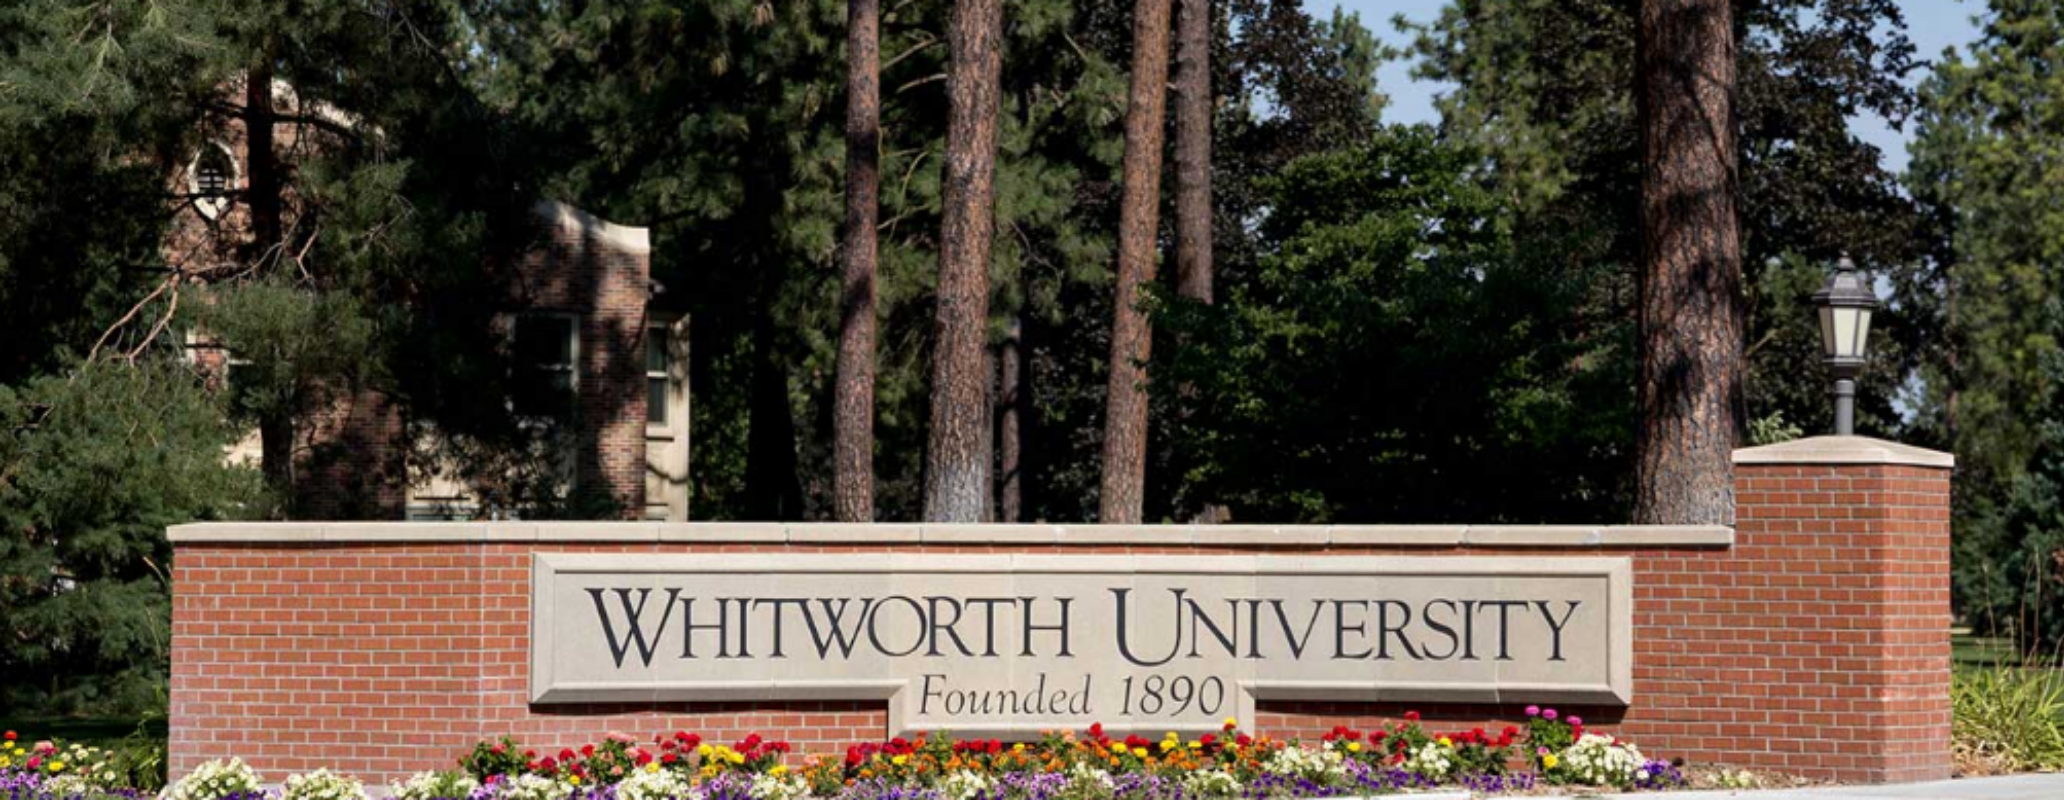 Whitworth University : Rankings, Notable Alumni, Admissions, Acceptance Rate, Fees, Courses, Majors and everything